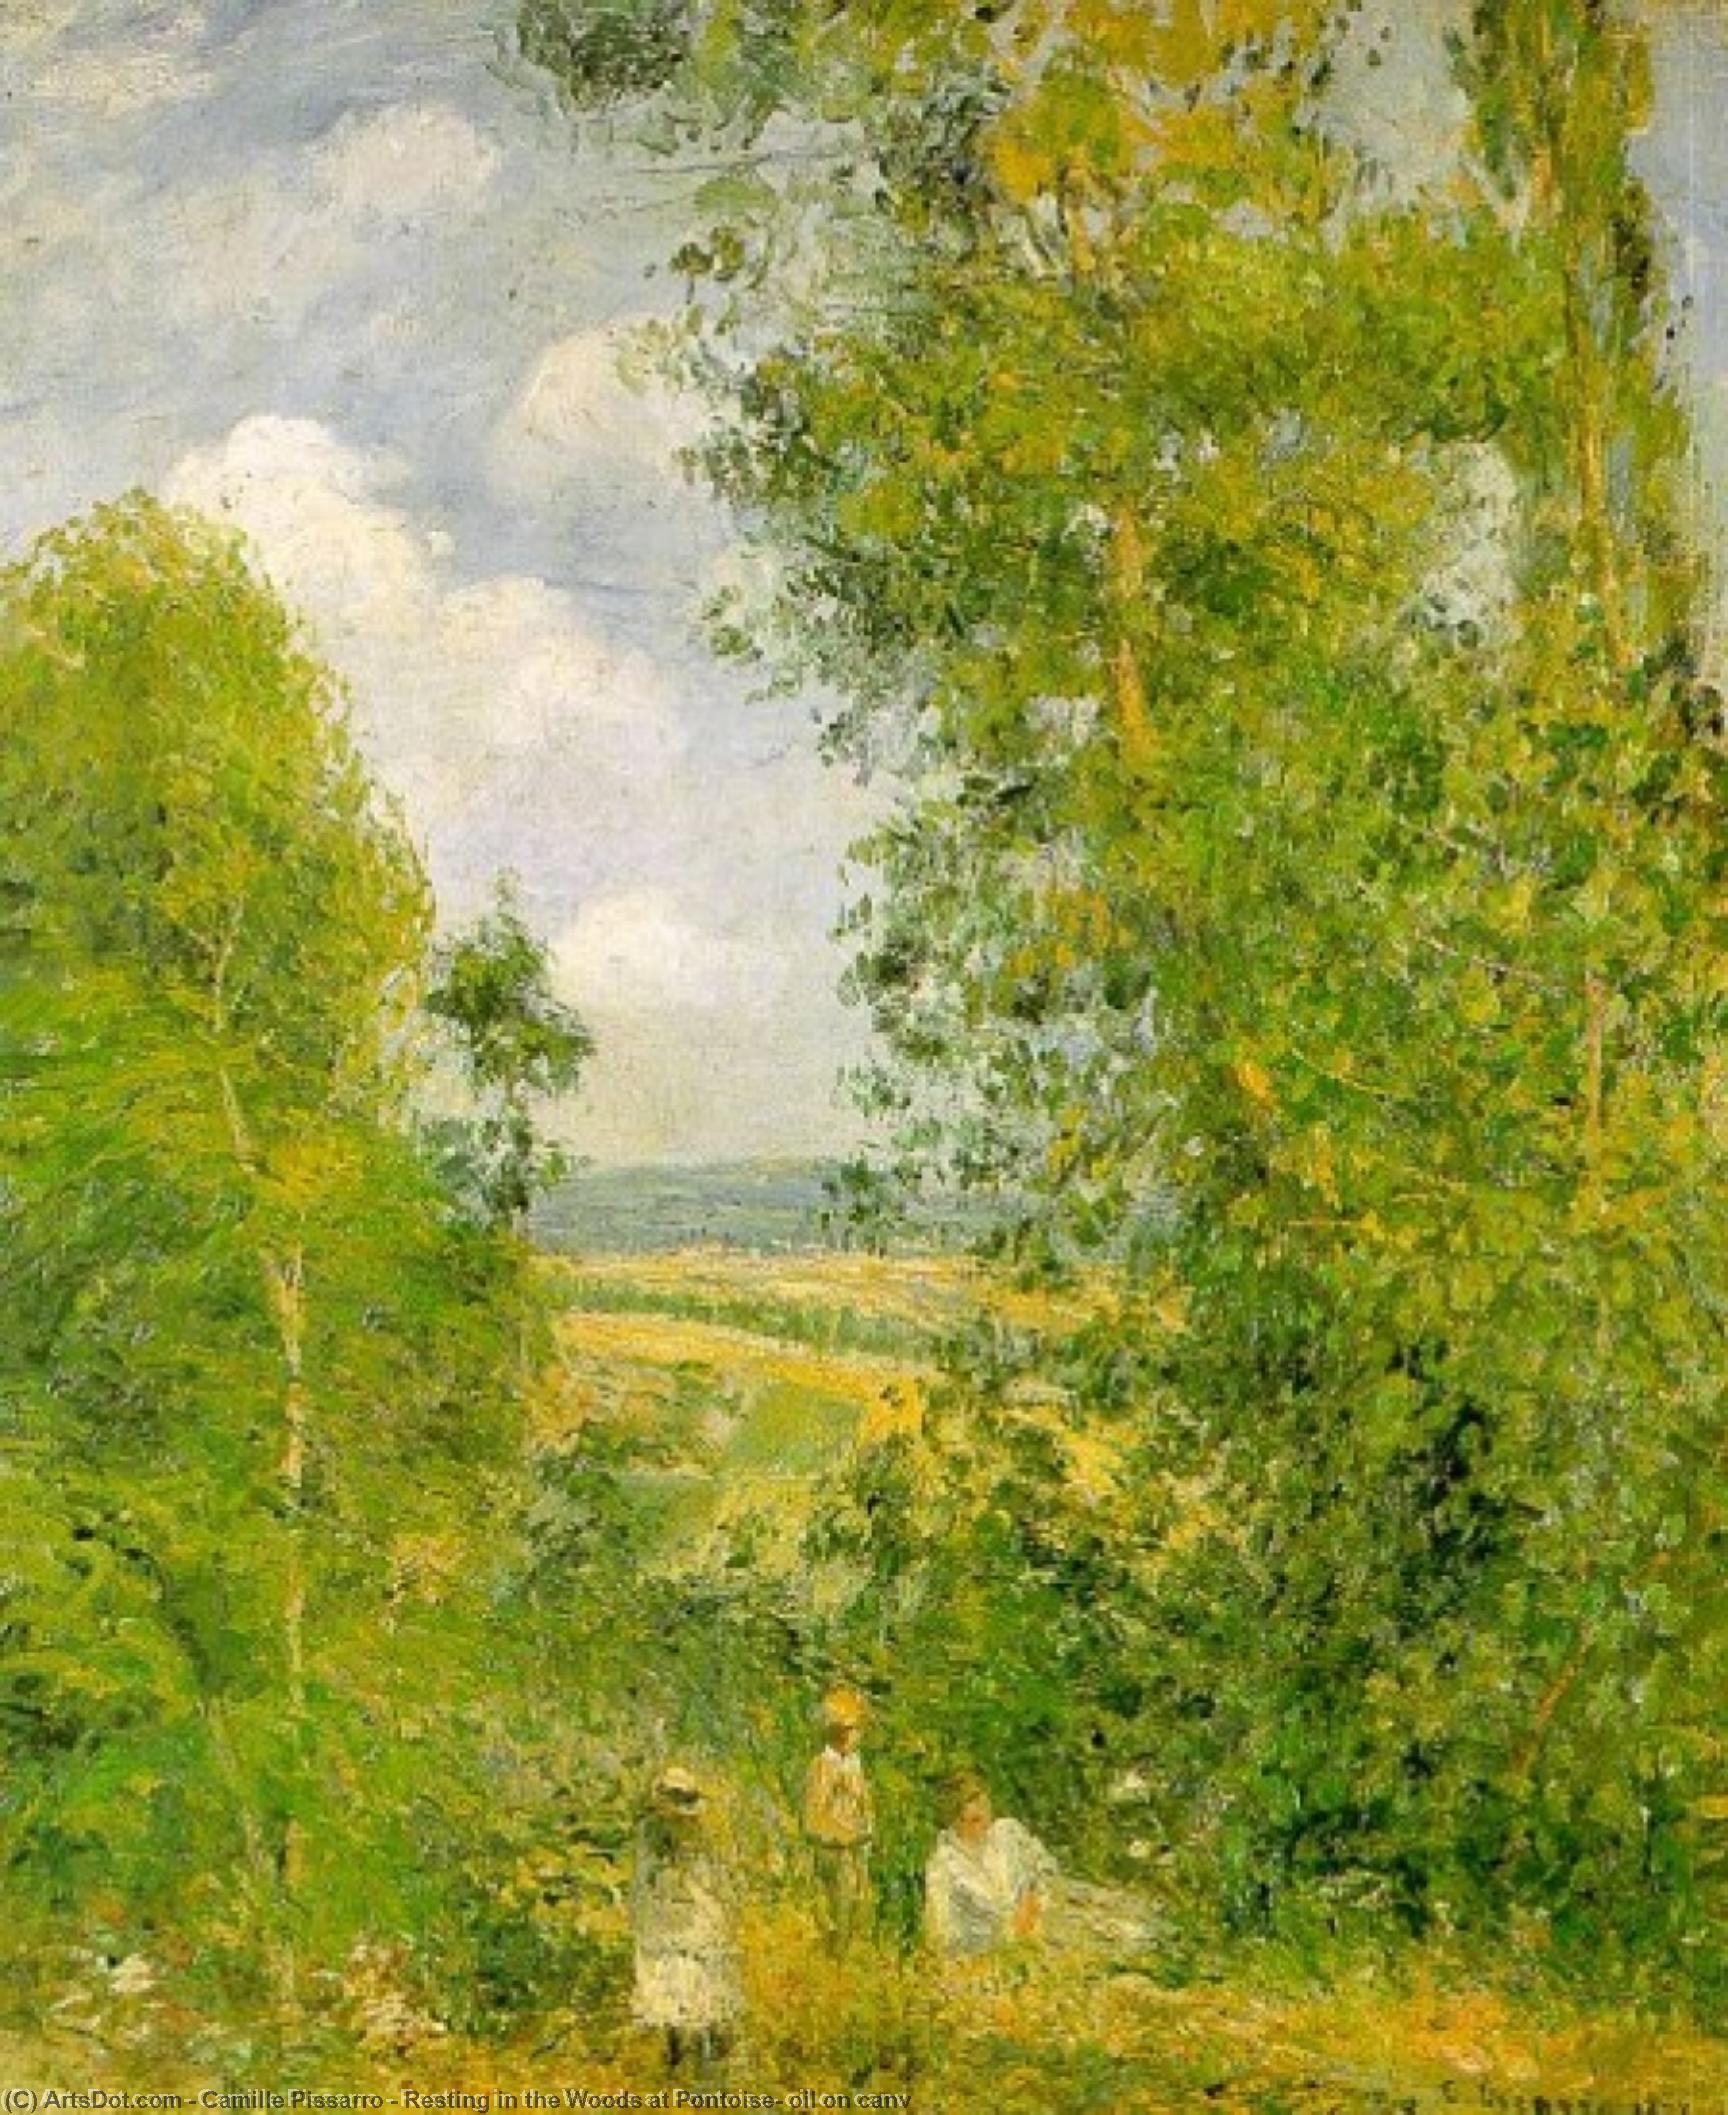 WikiOO.org - Encyclopedia of Fine Arts - Festés, Grafika Camille Pissarro - Resting in the Woods at Pontoise, oil on canv